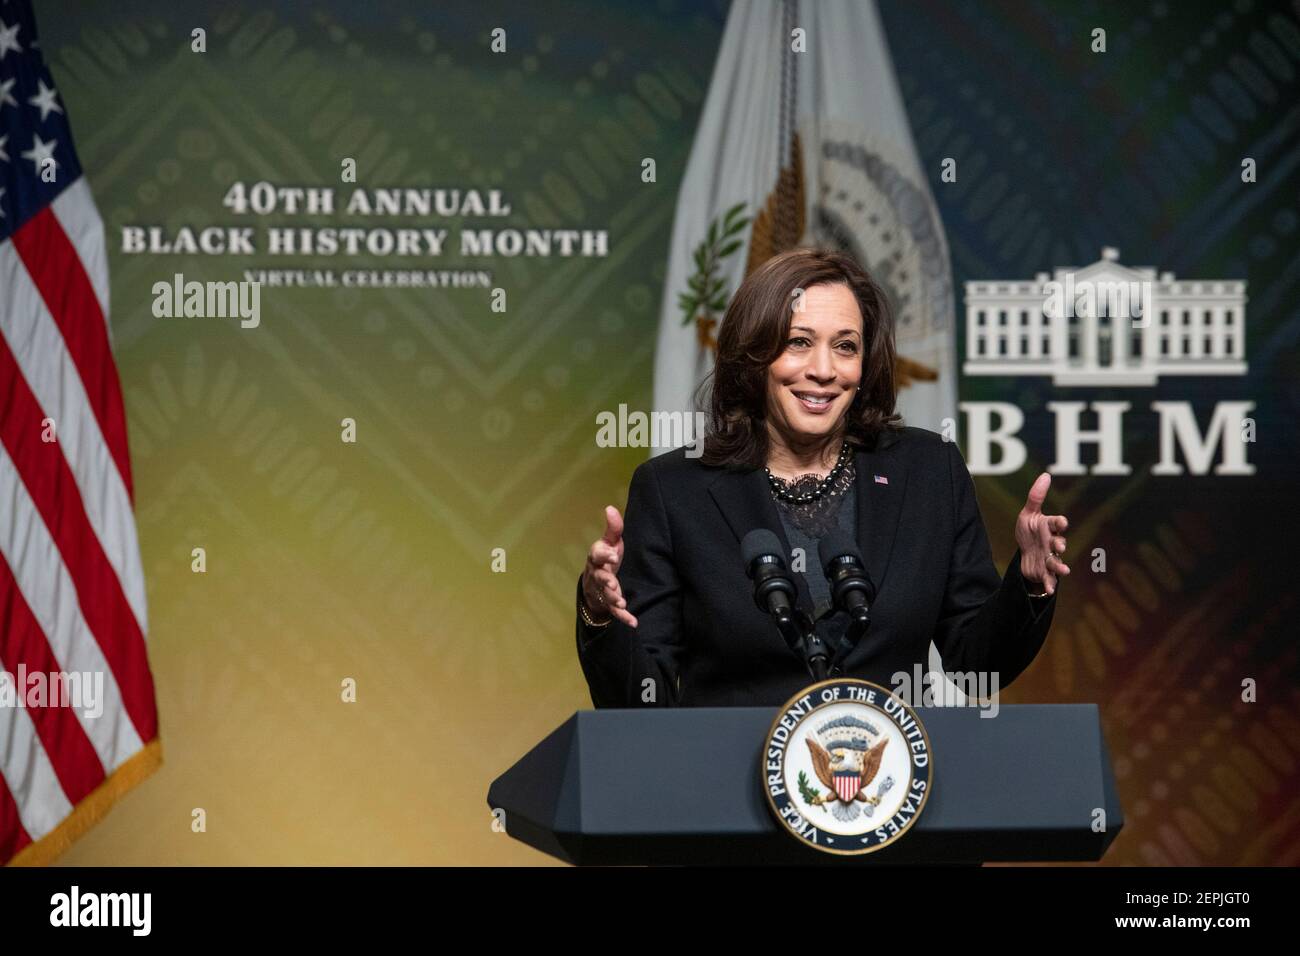 Washington, United States Of America. 27th Feb, 2021. United States Vice President Kamala Harris delivers remarks at the 40th Annual Black History Month Virtual Celebration hosted by US House Majority Leader Steny Hoyer (Democrat of Maryland) in the South Court Auditorium of the White House in Washington, DC on Saturday, February 27, 2021. Credit: Rod Lamkey/Pool/Sipa USA Credit: Sipa USA/Alamy Live News Stock Photo